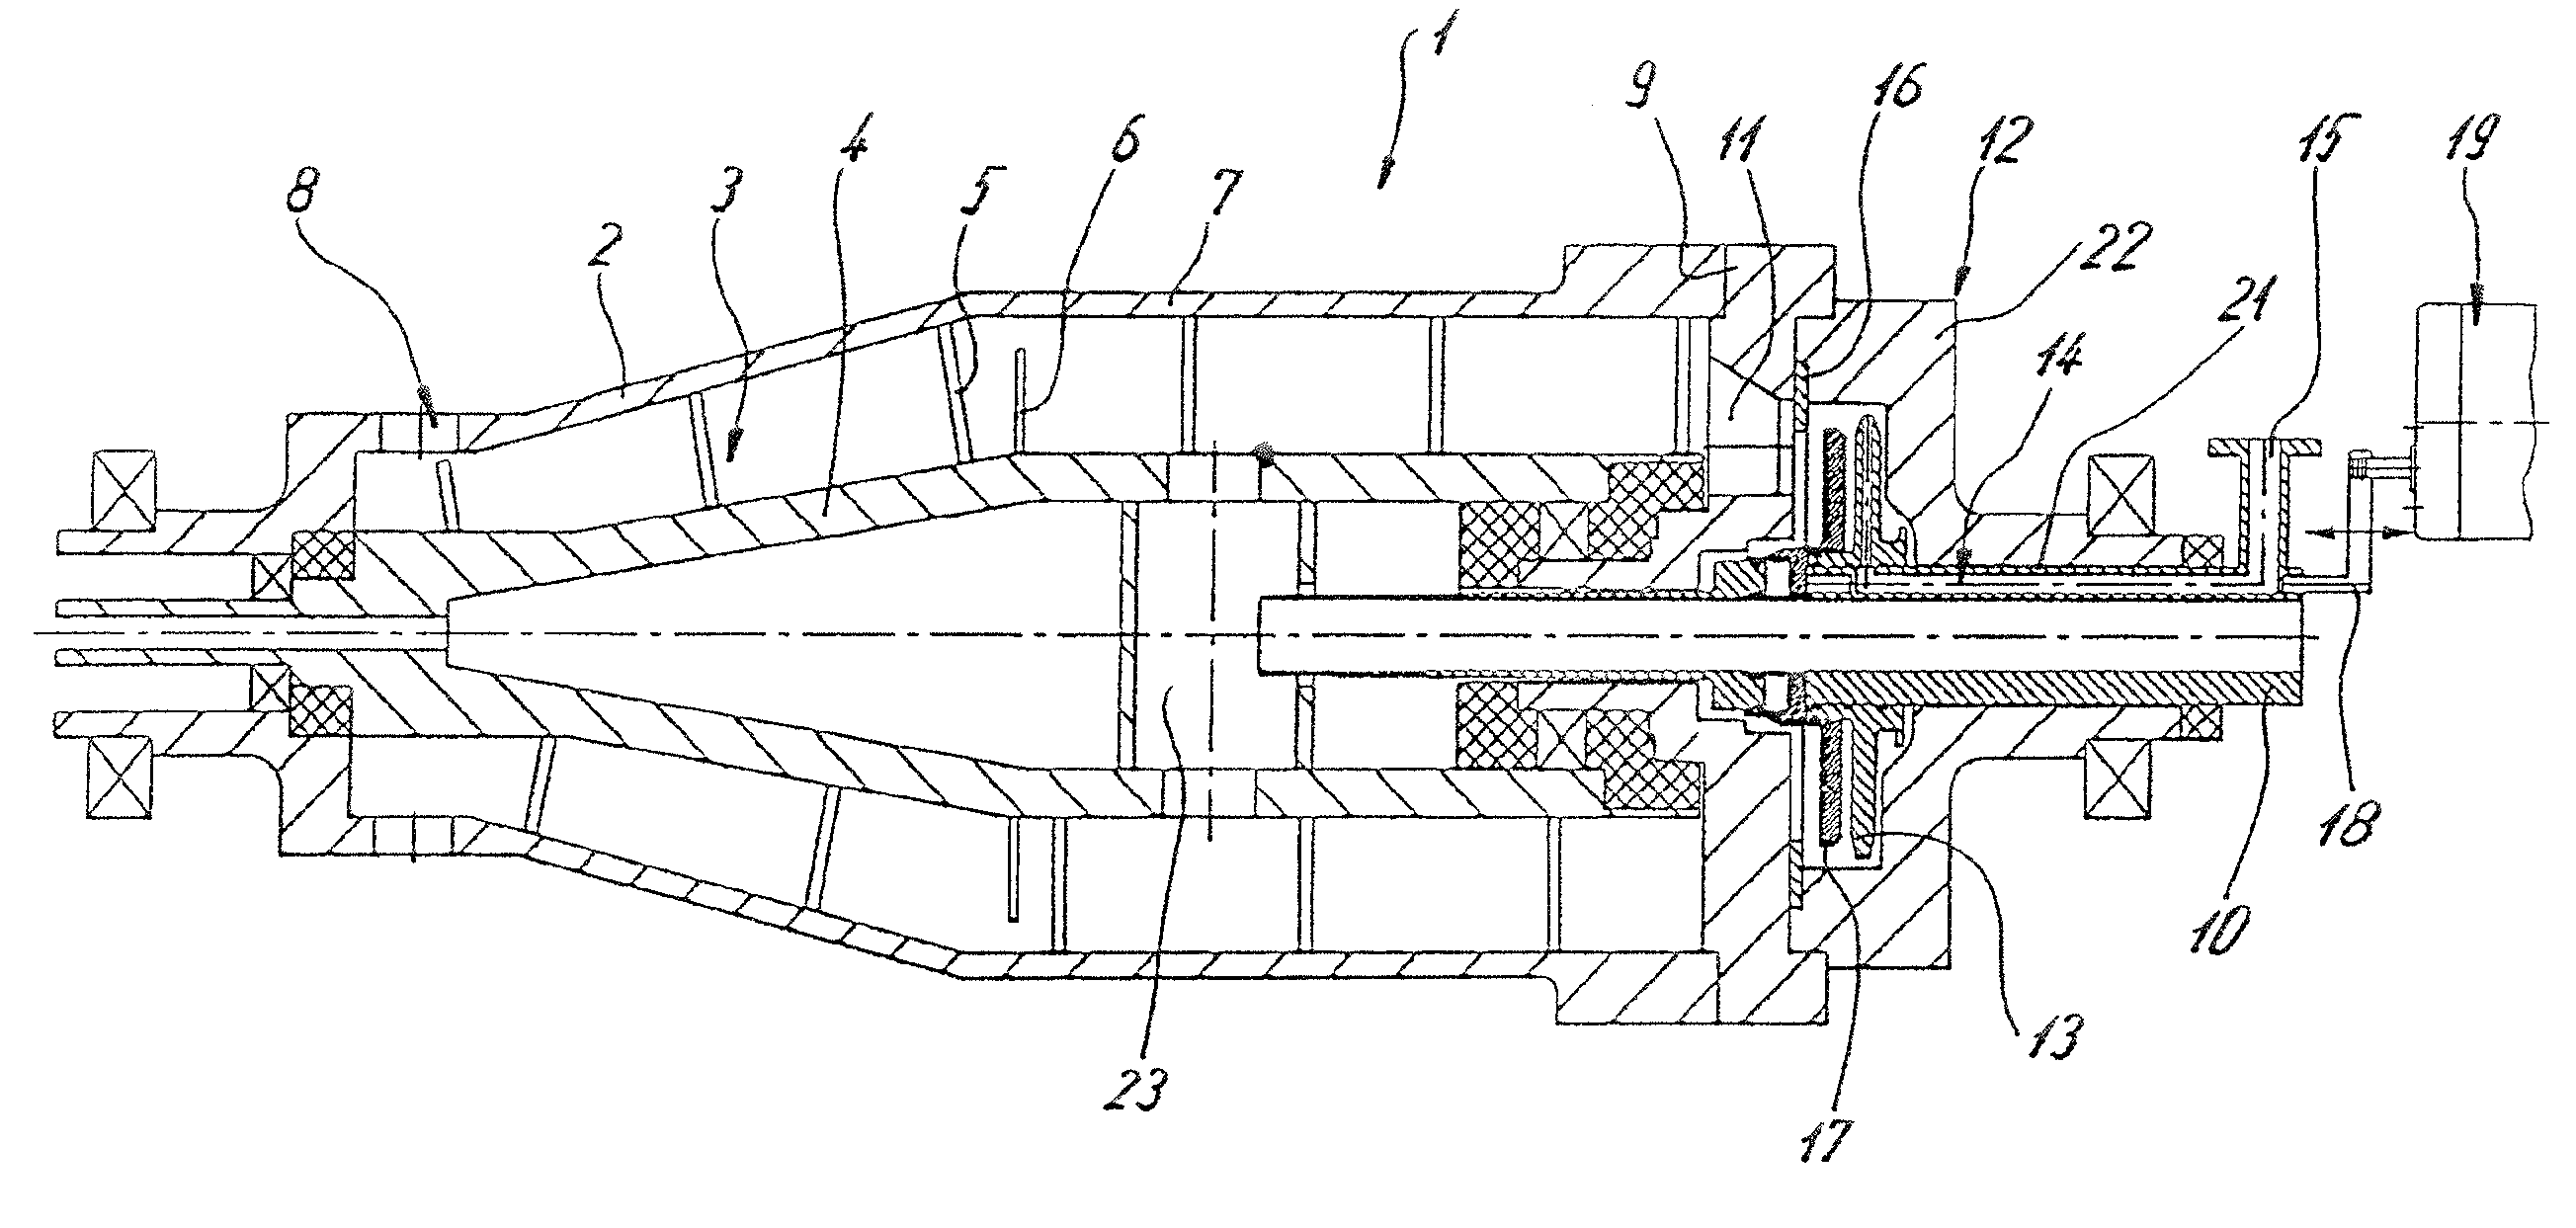 Solid bowl screw centrifuge comprising a centripetal pump with a throtting device